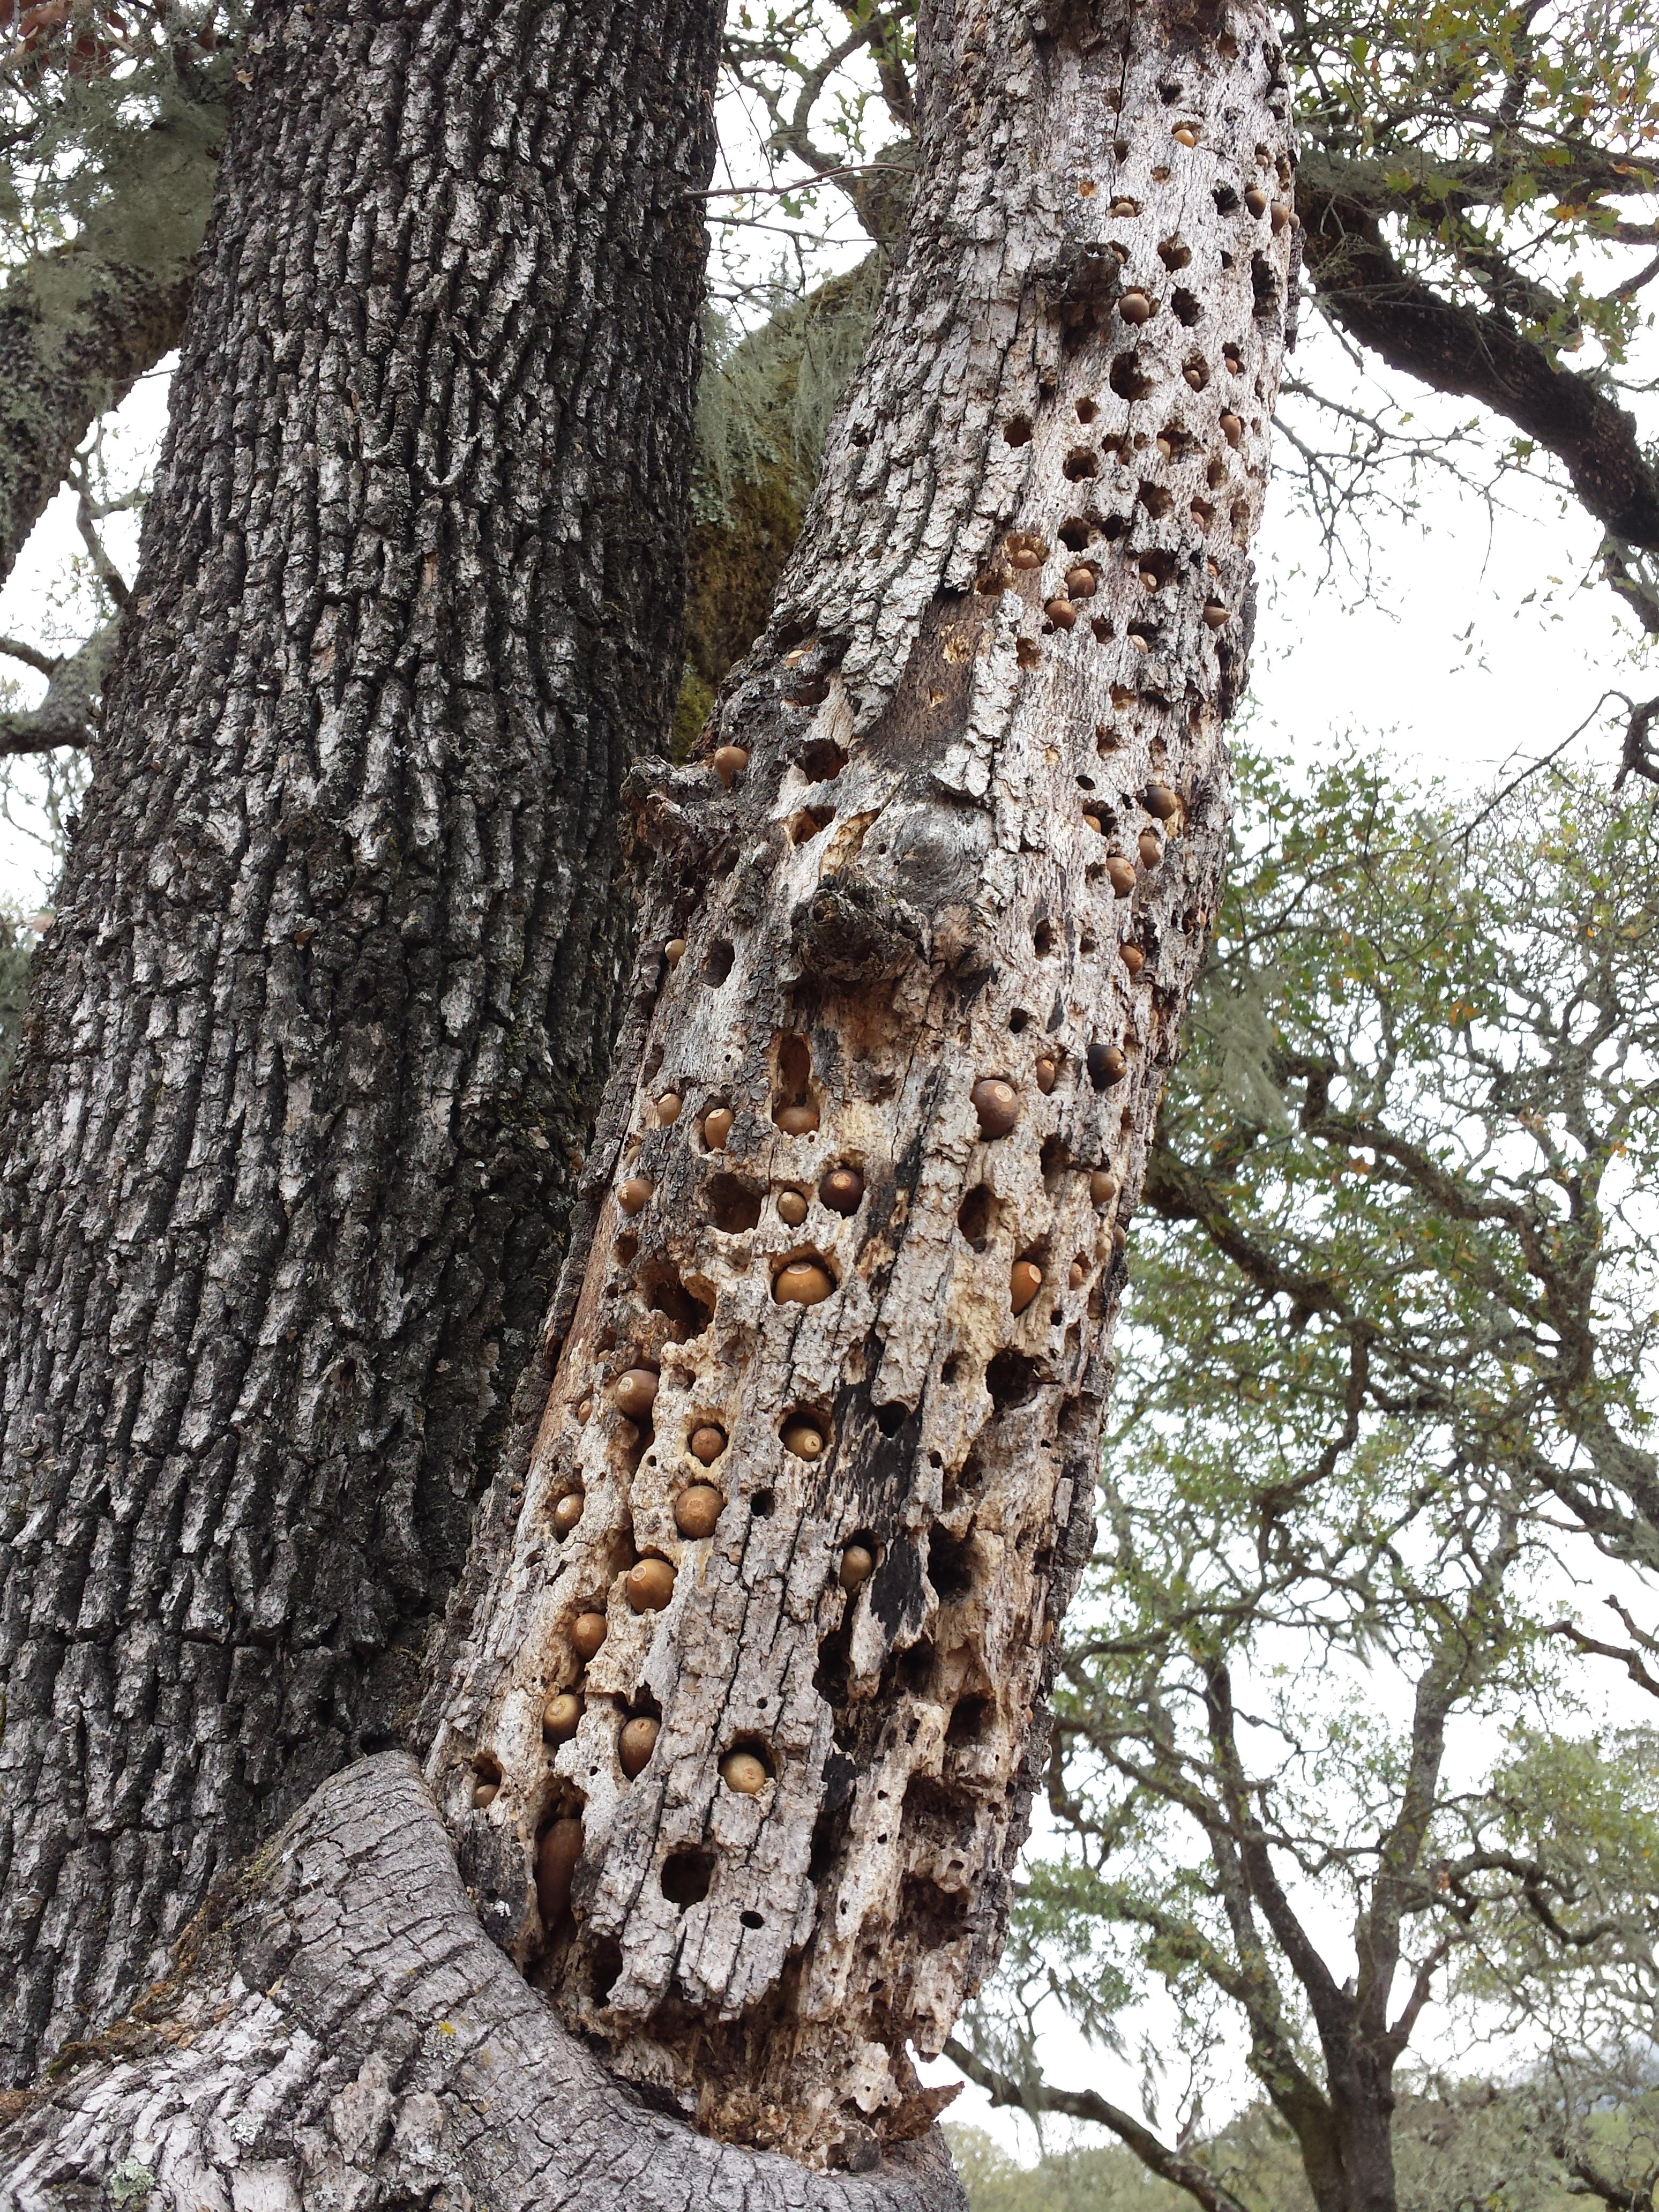 Animals are storing acorns in the holes that woodpeckers made in 

this dead tree.